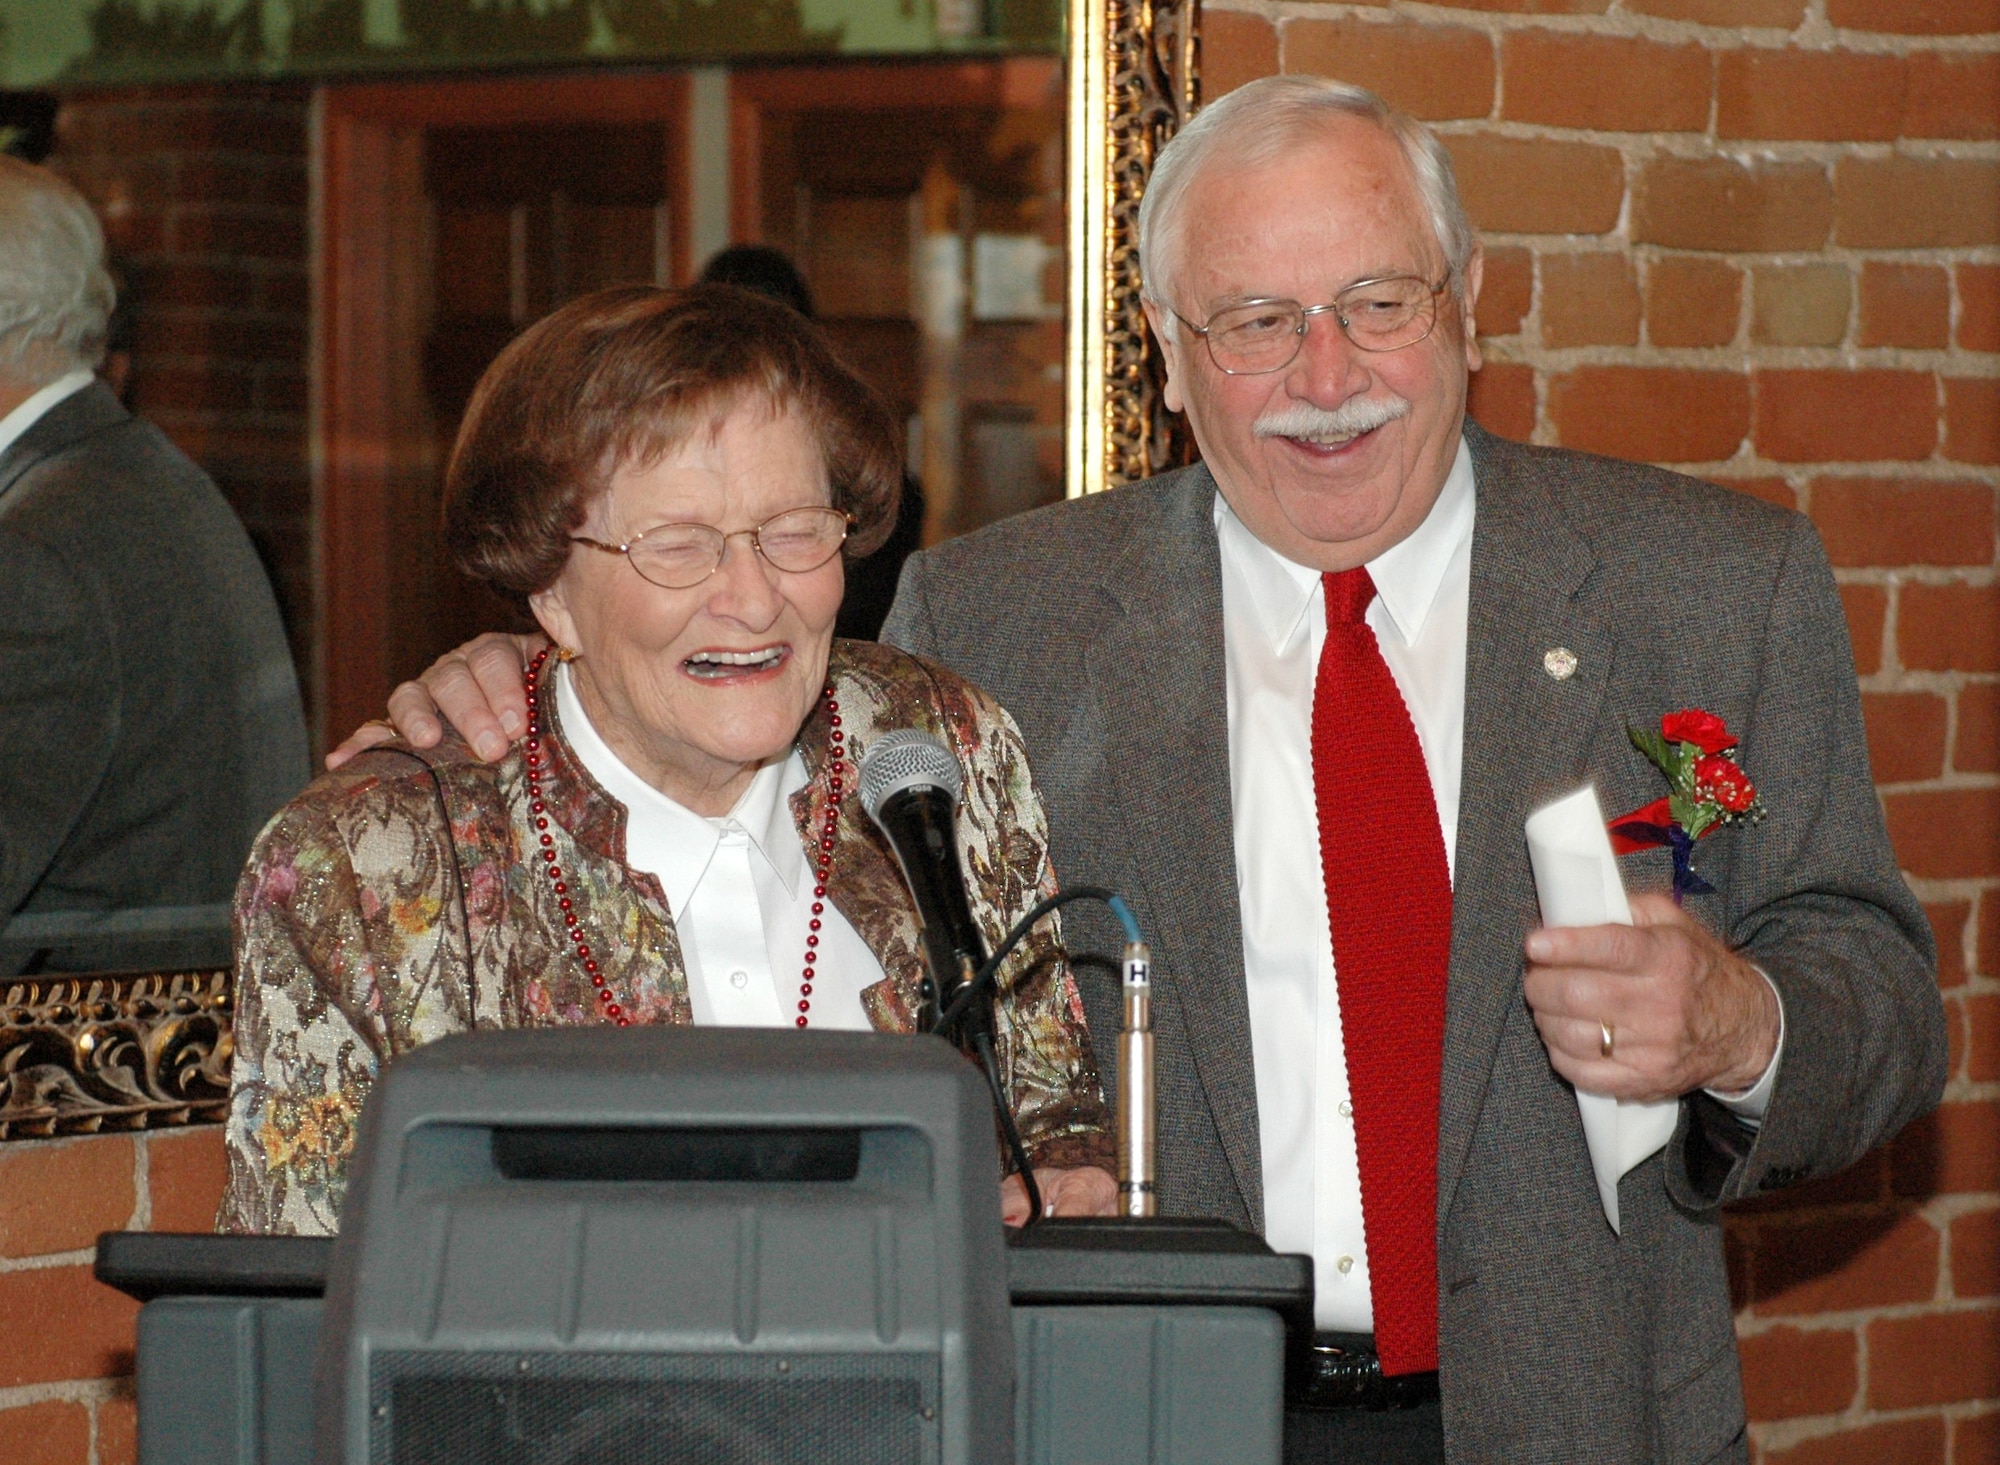 Tucson business and community icons Bill Valenzuela and Dorothy Finley trade jokes from the podium at the Tucson Light award banquet, Feb 13. Finley was one of Valenzuela’s grade school teachers. (Air National Guard photo by Capt. Gabe Johnson)